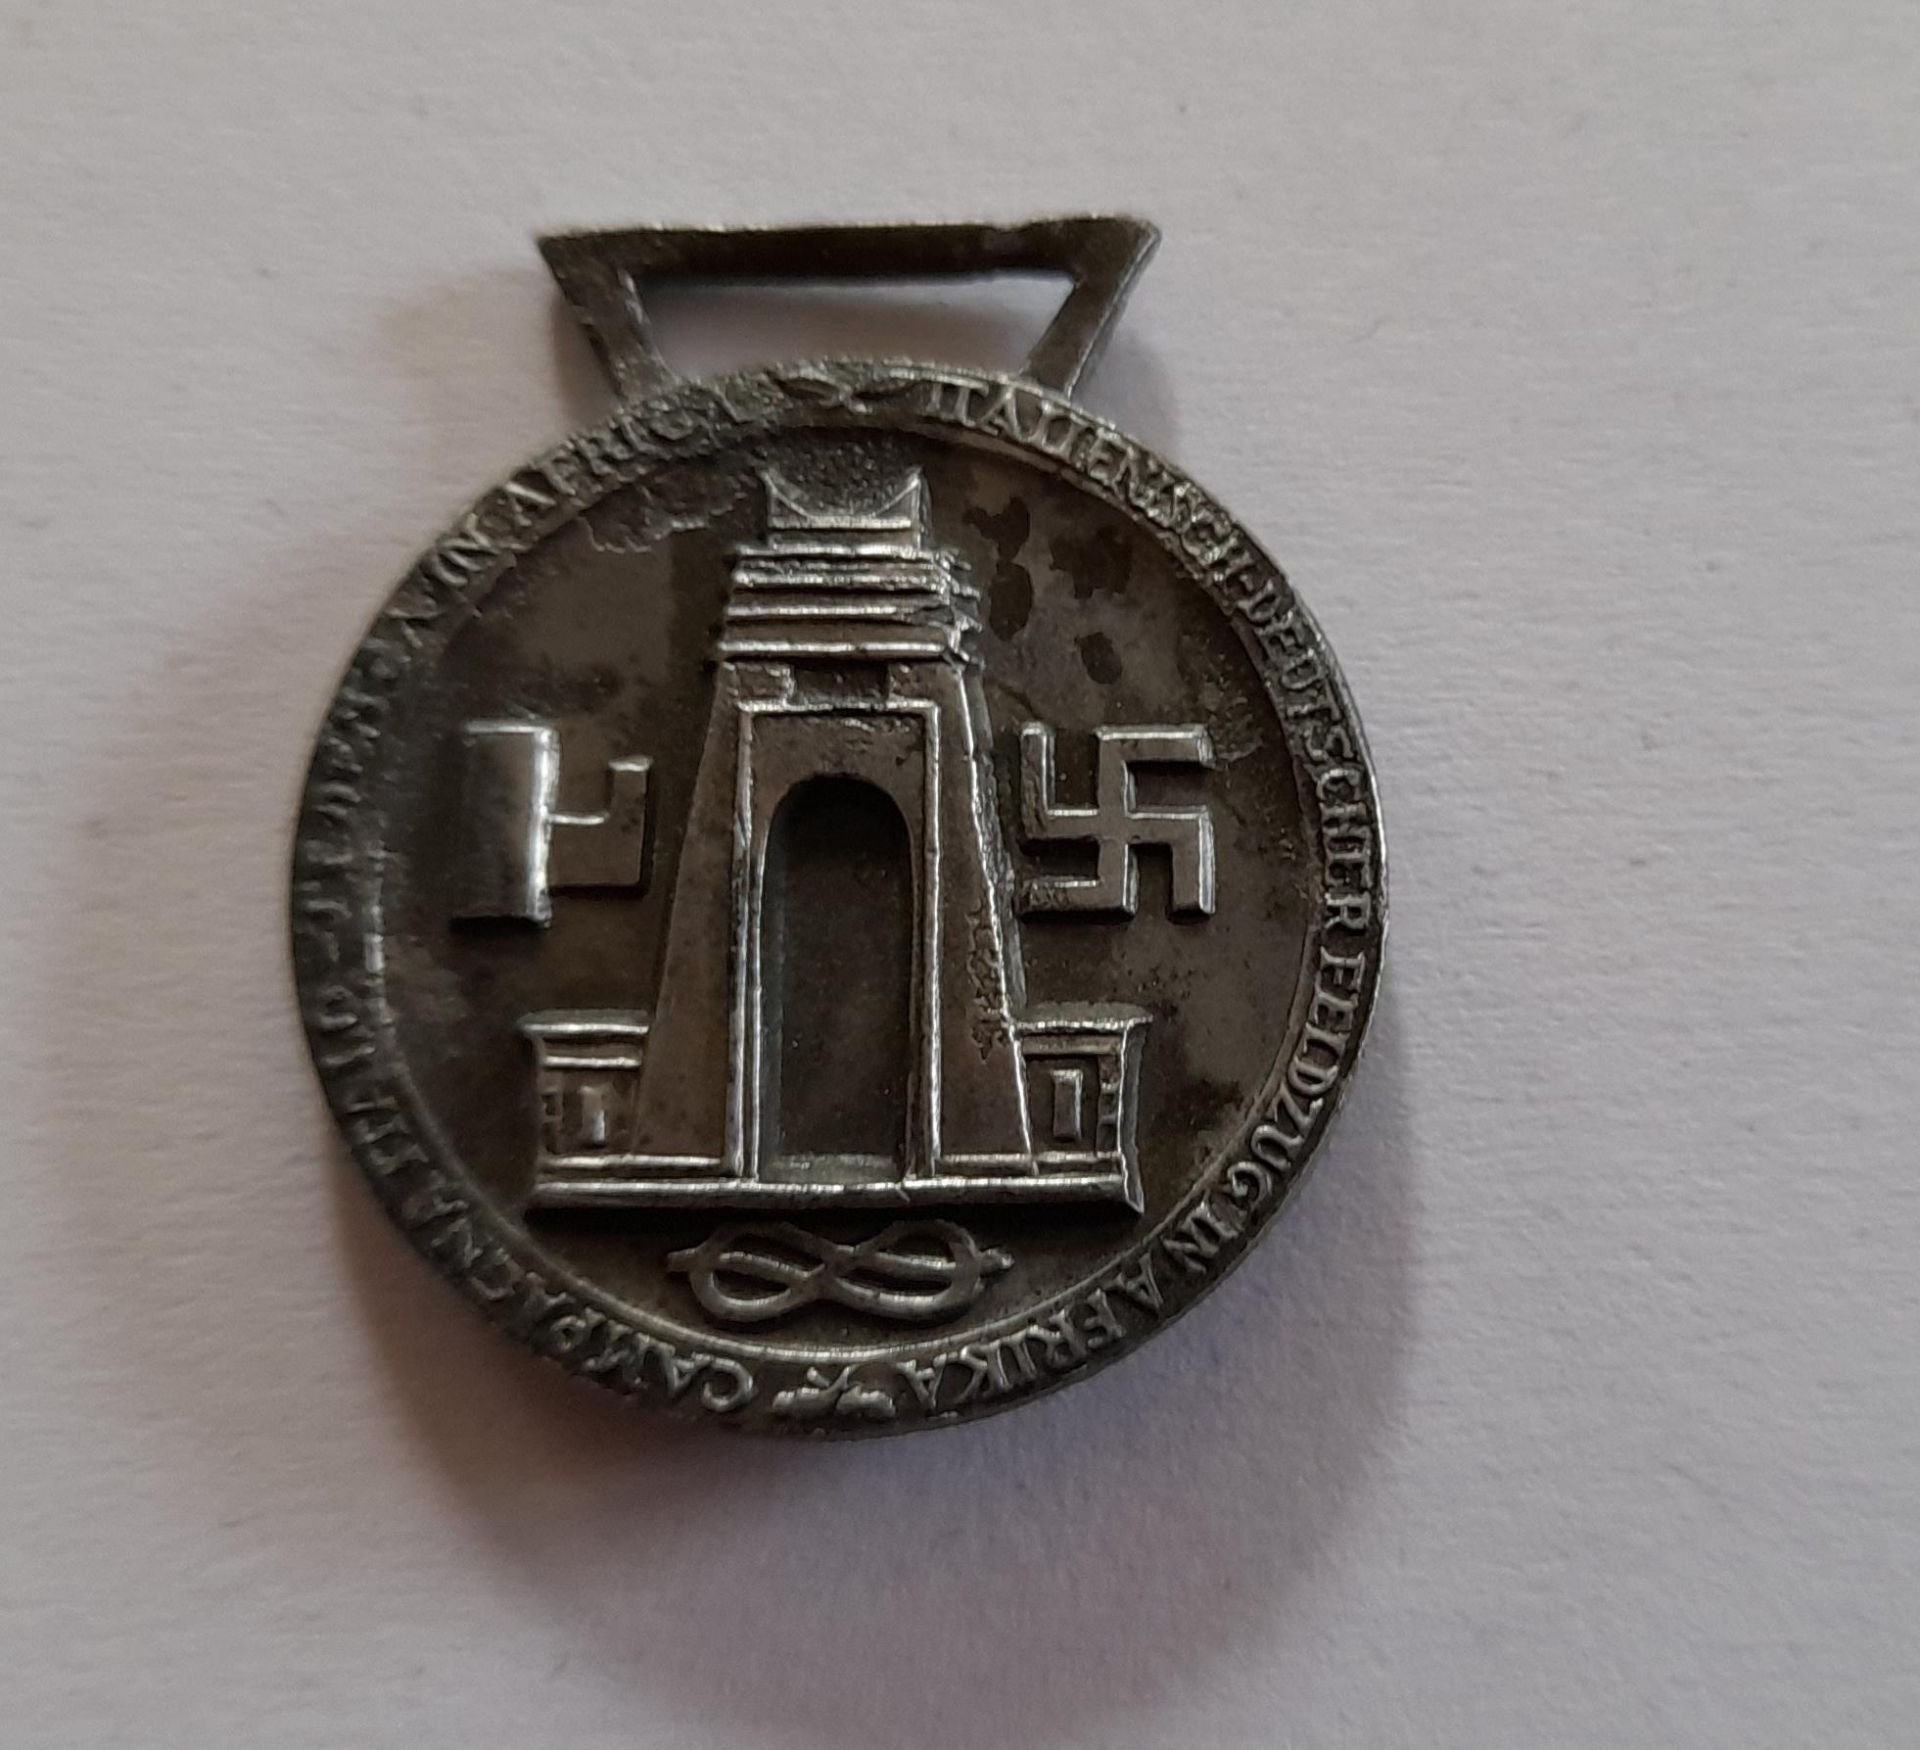 WW11 German and Italian campaign in Africa, white metal FROM DUXFORD AVIATION